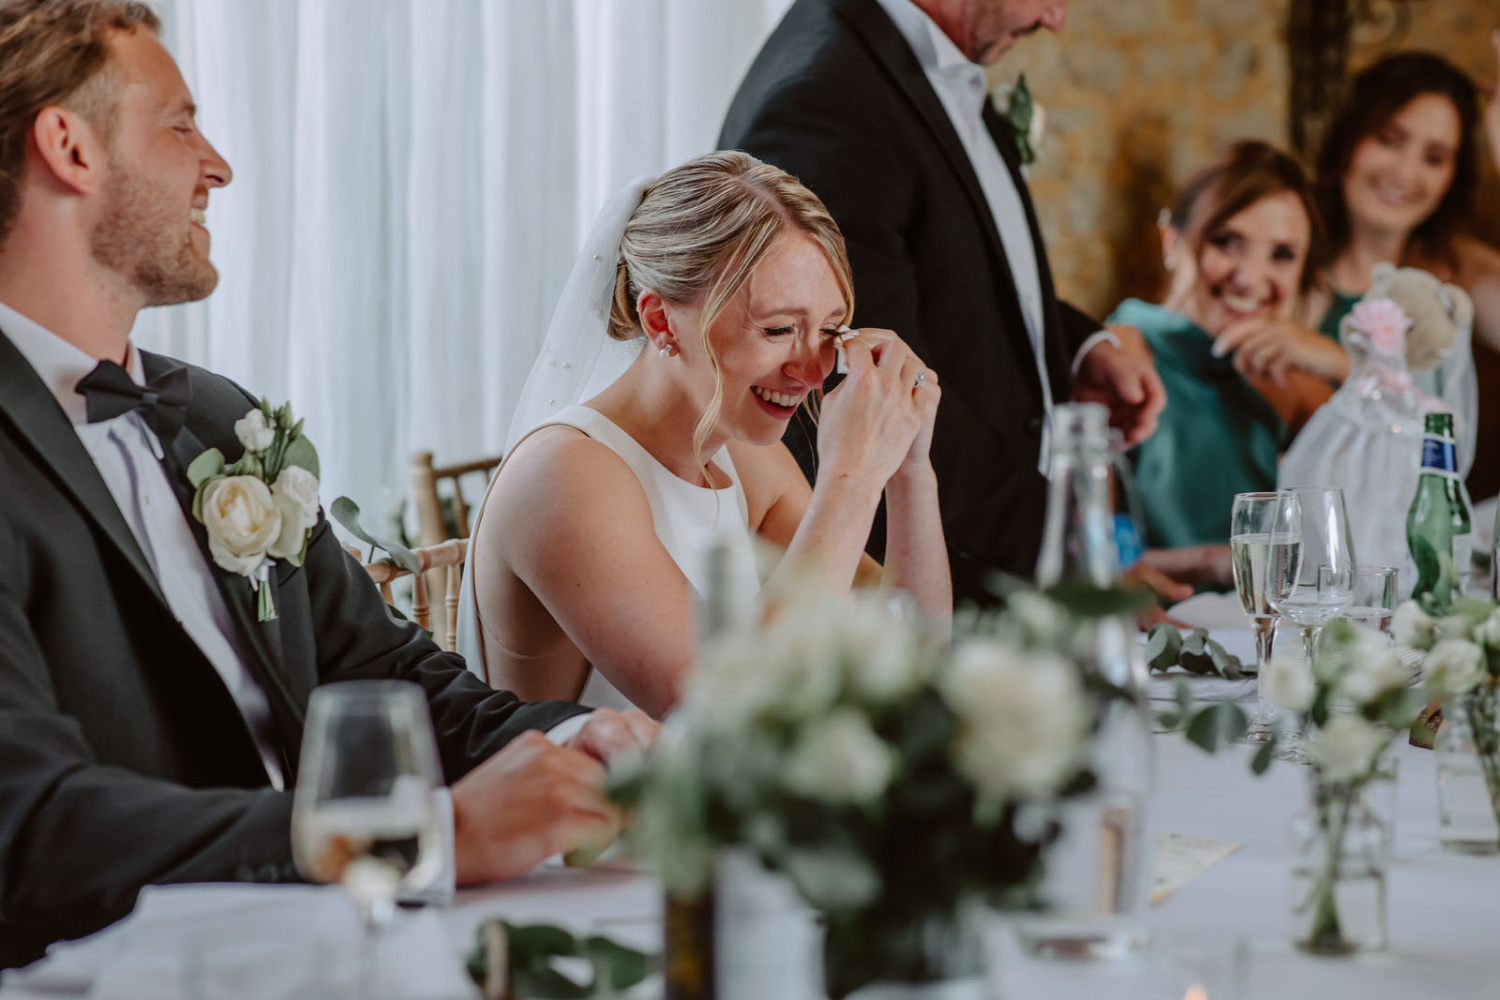 A bride and groom laughing at their wedding reception.